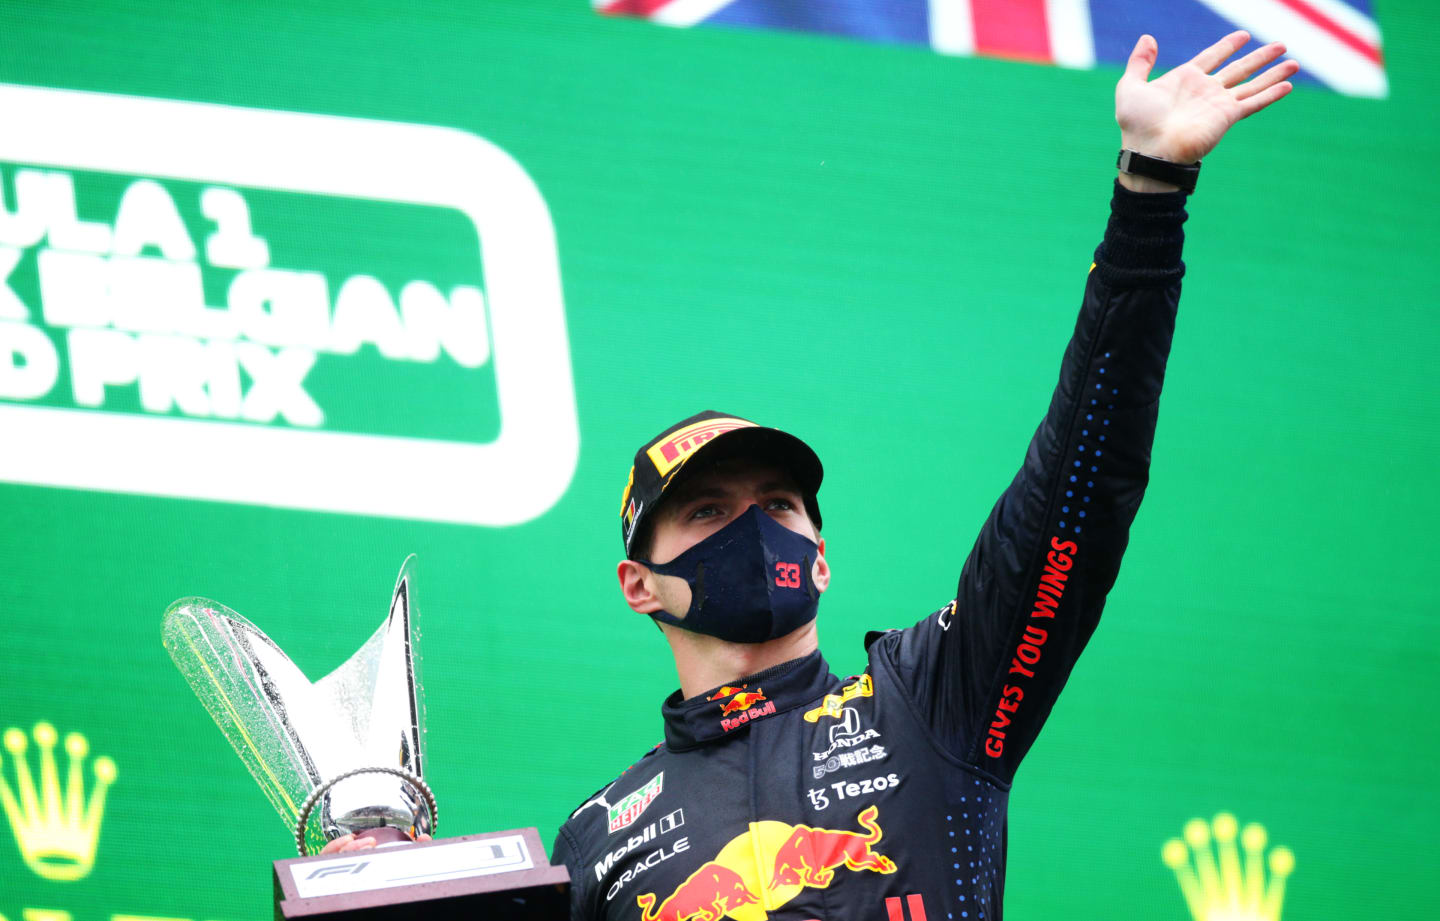 SPA, BELGIUM - AUGUST 29: Race winner Max Verstappen of Netherlands and Red Bull Racing celebrates on the podium during the F1 Grand Prix of Belgium at Circuit de Spa-Francorchamps on August 29, 2021 in Spa, Belgium. (Photo by Peter Fox/Getty Images)